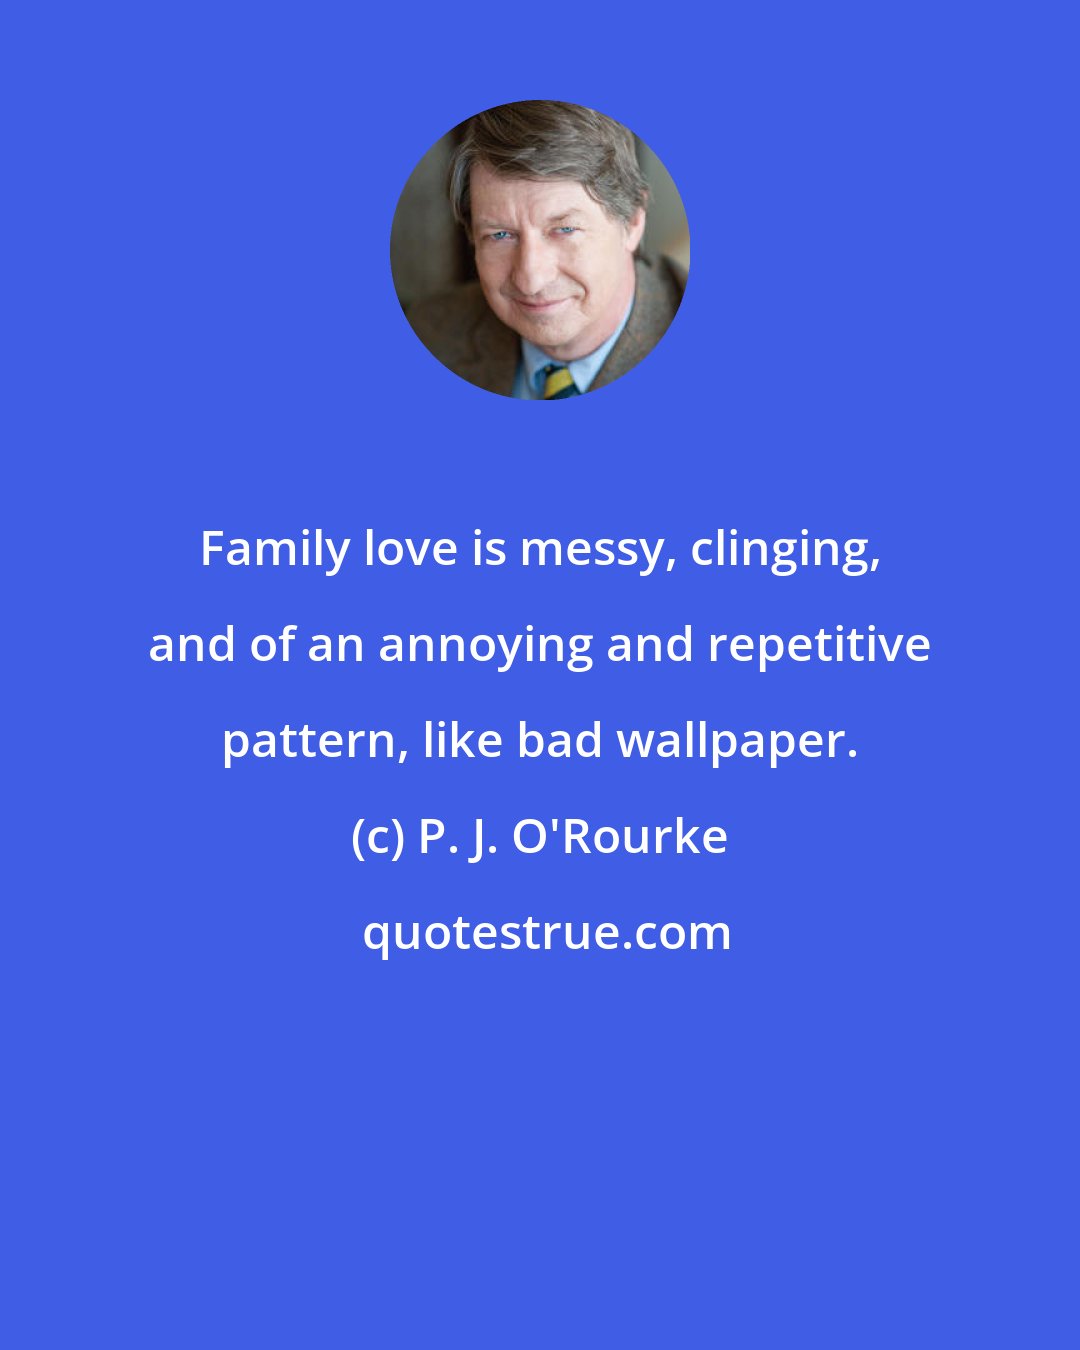 P. J. O'Rourke: Family love is messy, clinging, and of an annoying and repetitive pattern, like bad wallpaper.